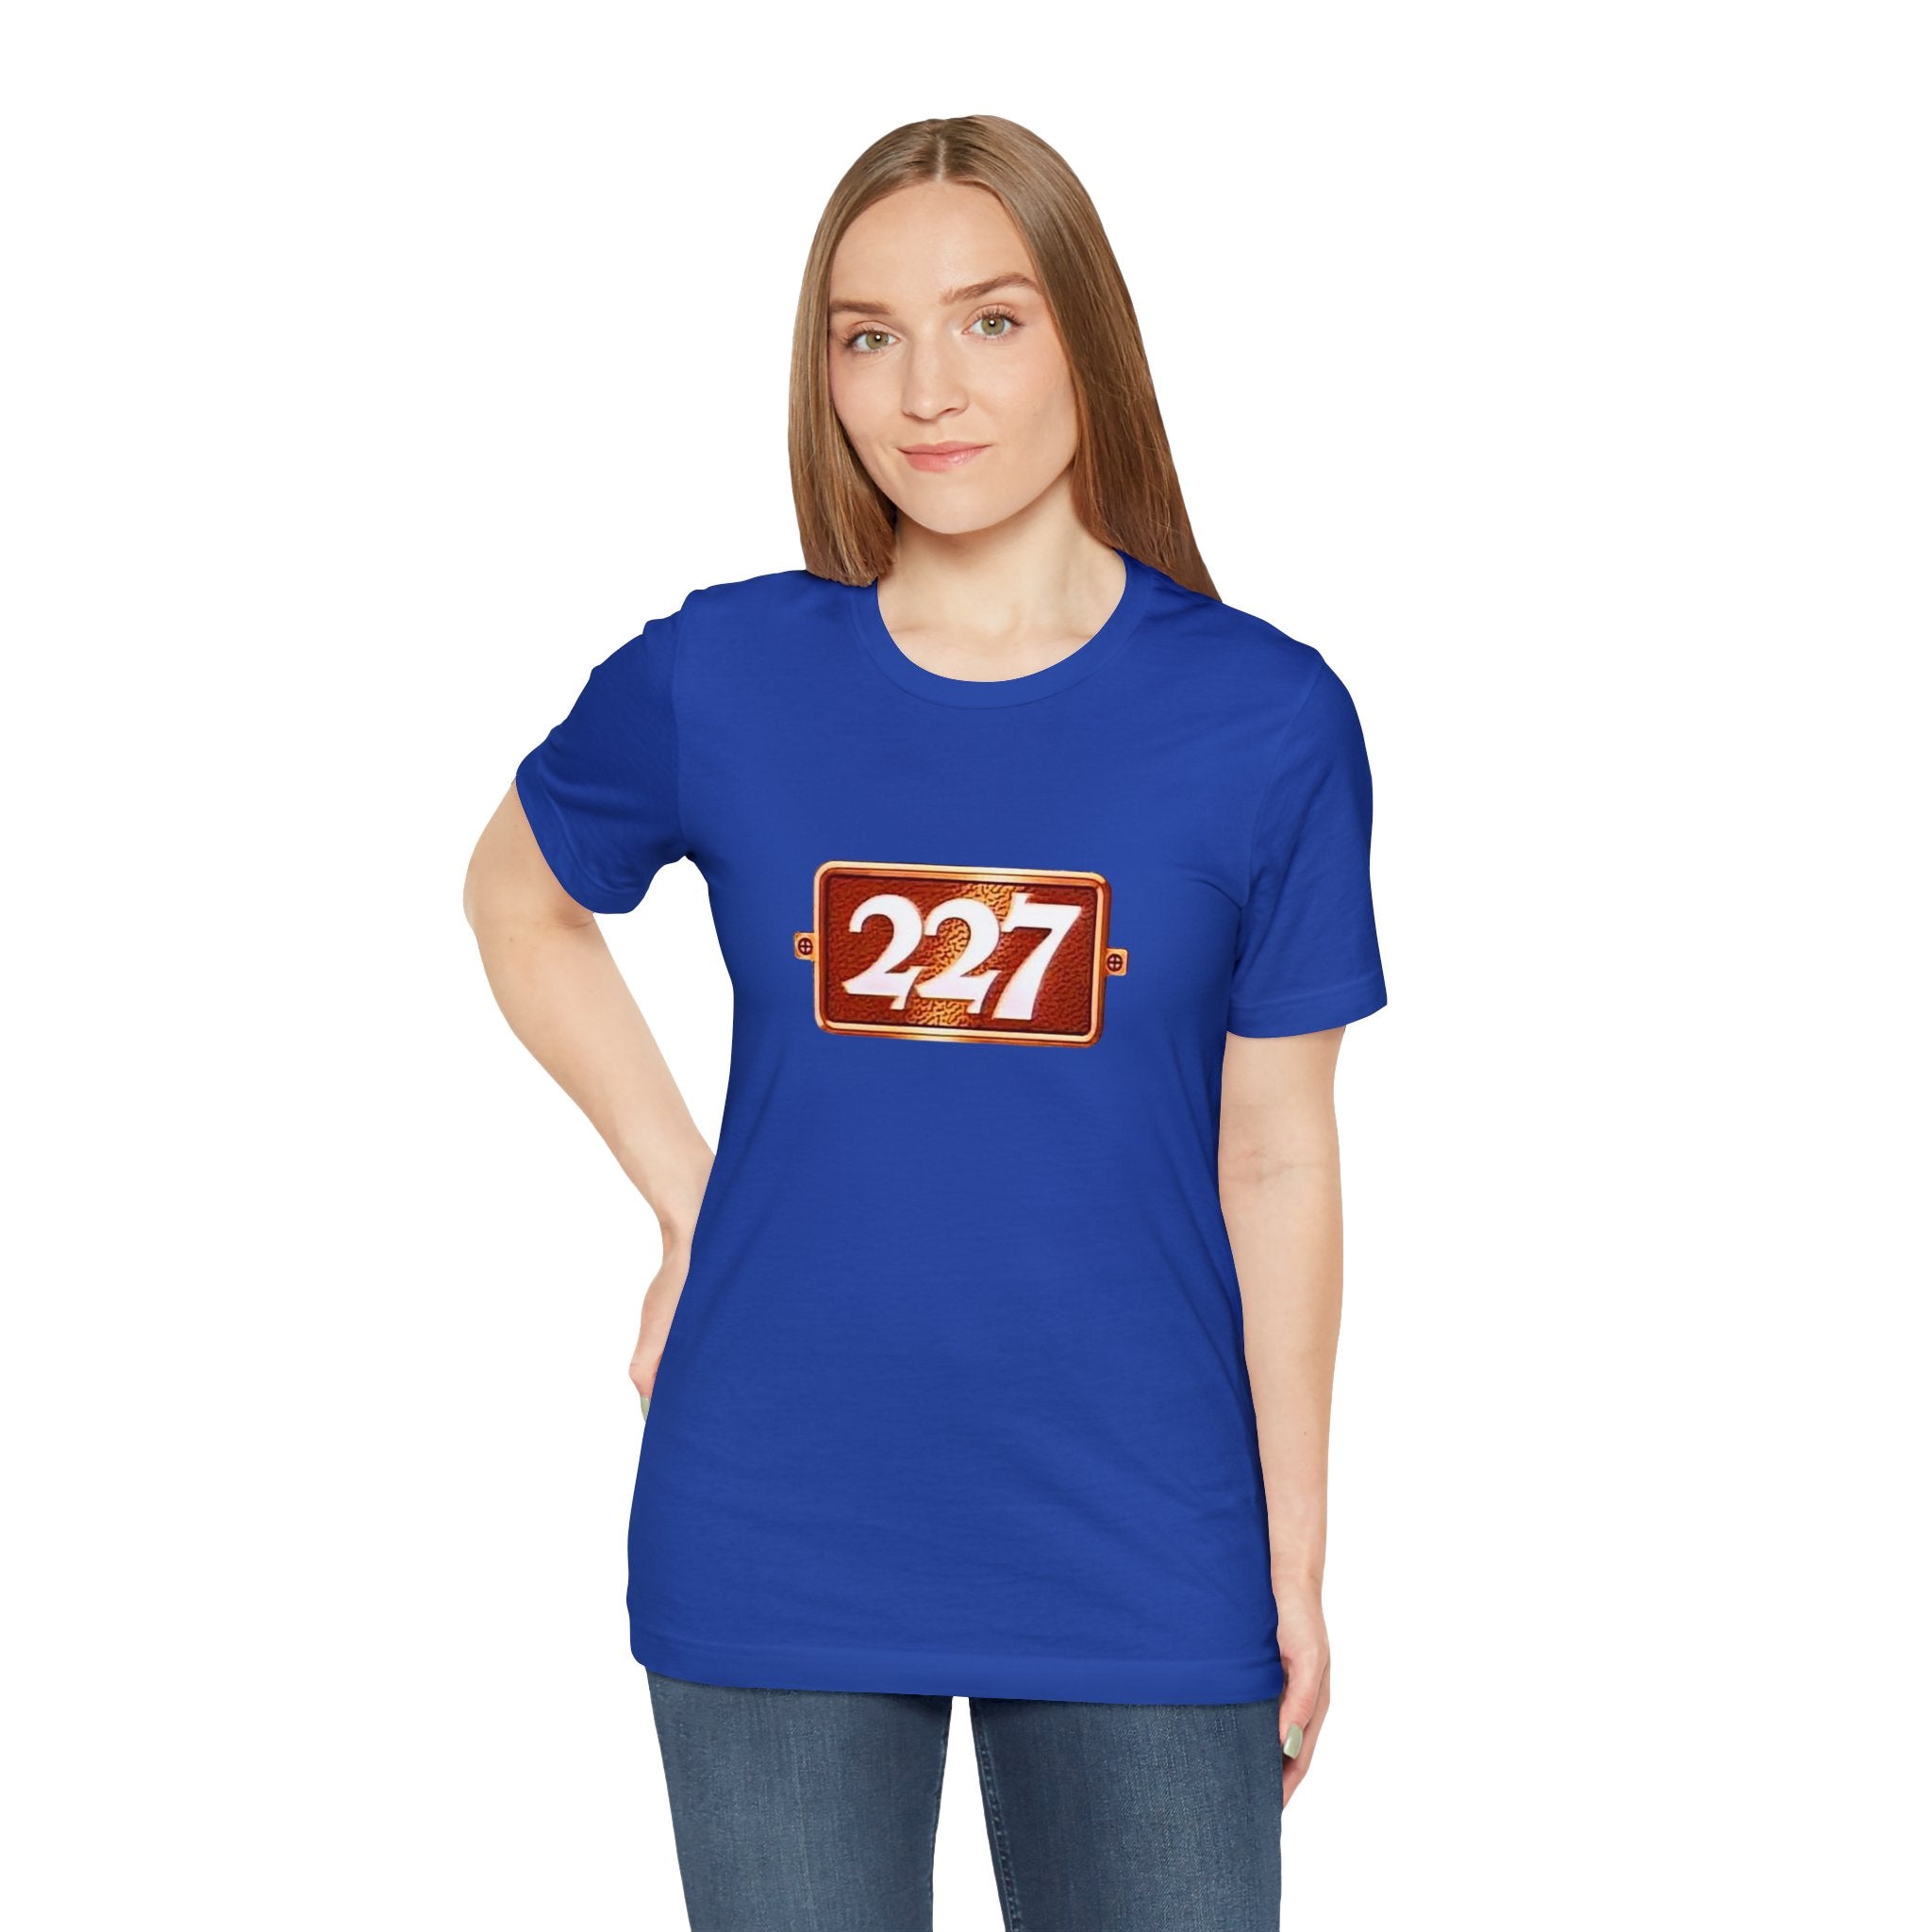 https://creationsbychrisandcarlos.store/products/227-tv-show-unisex-jersey-short-sleeve-tee